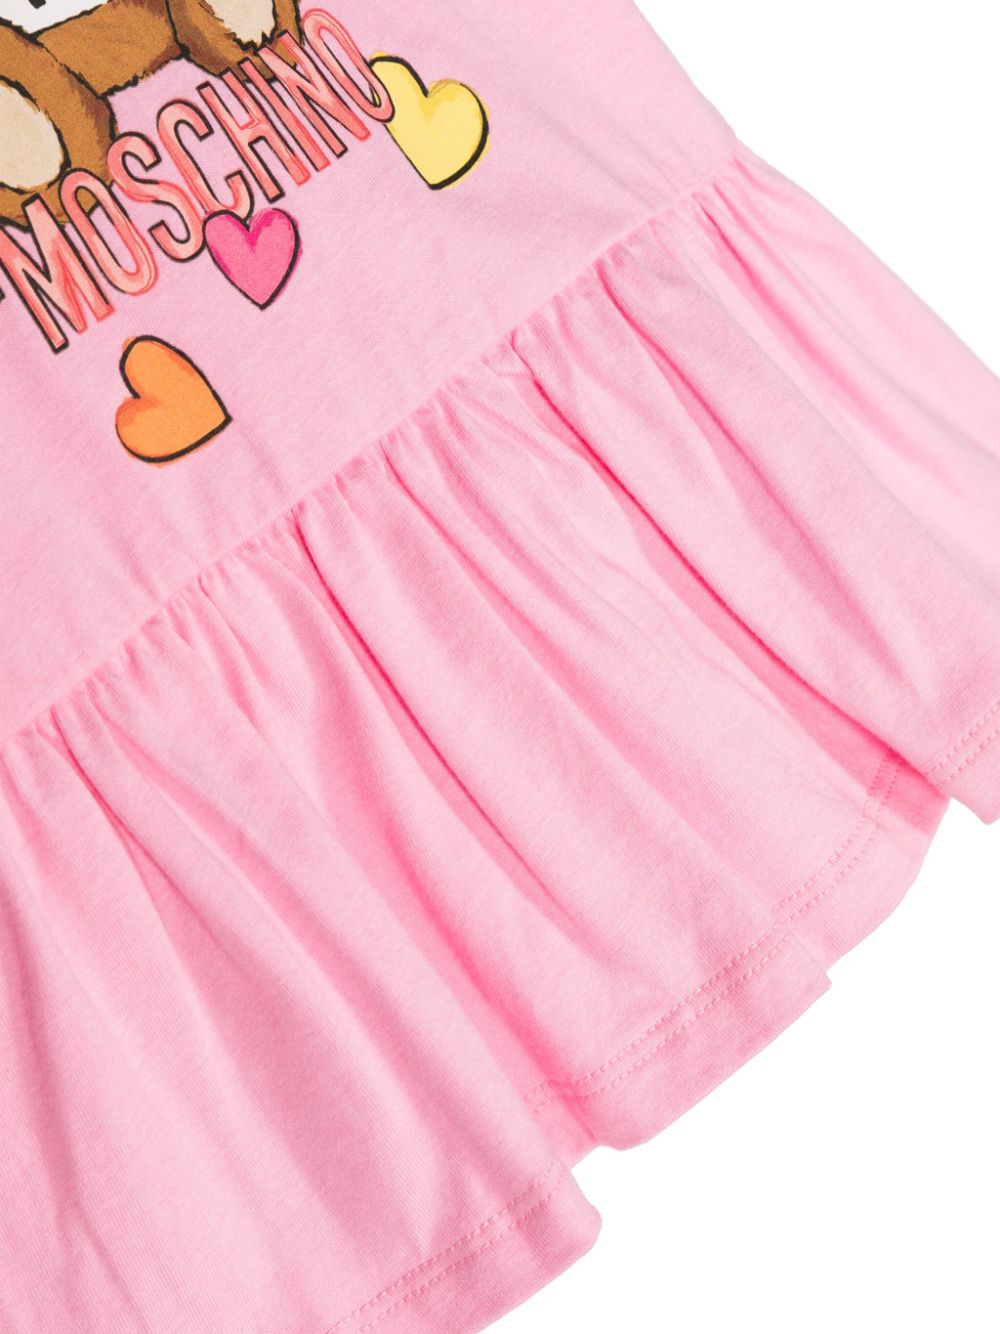 Pink dress for baby girls with bear